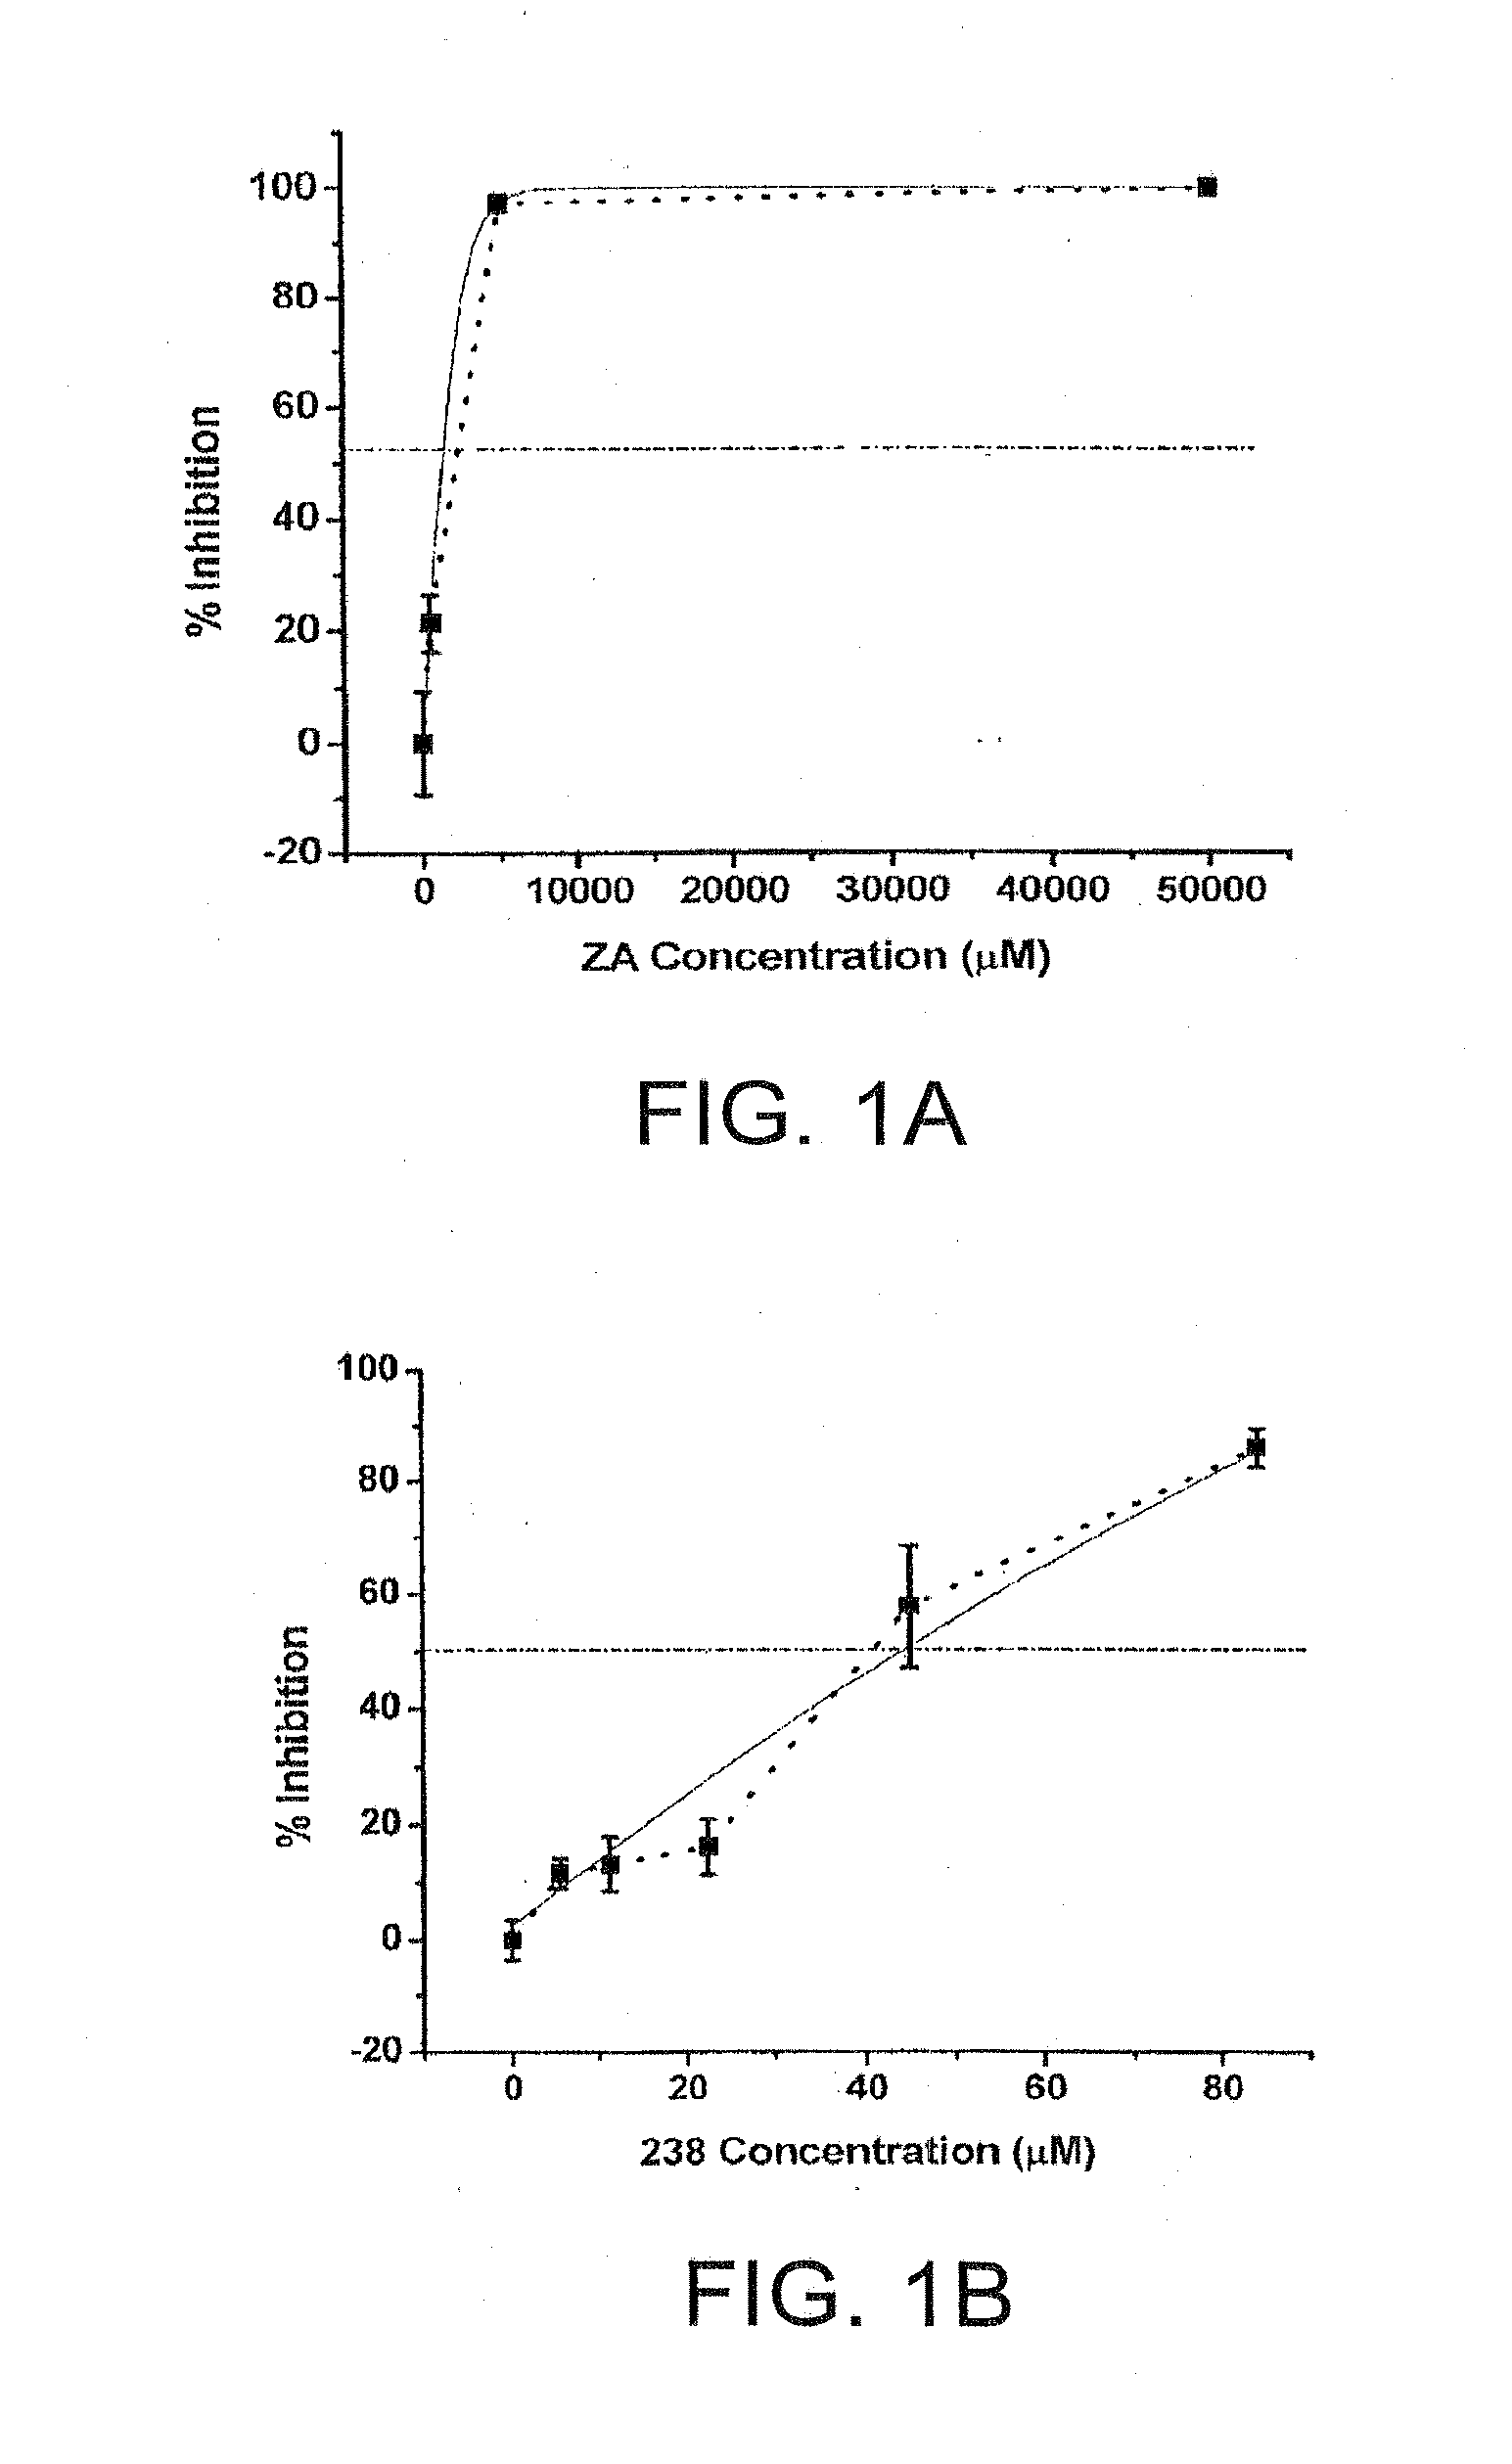 Anti-viral properties of zosteric acid and related molecules